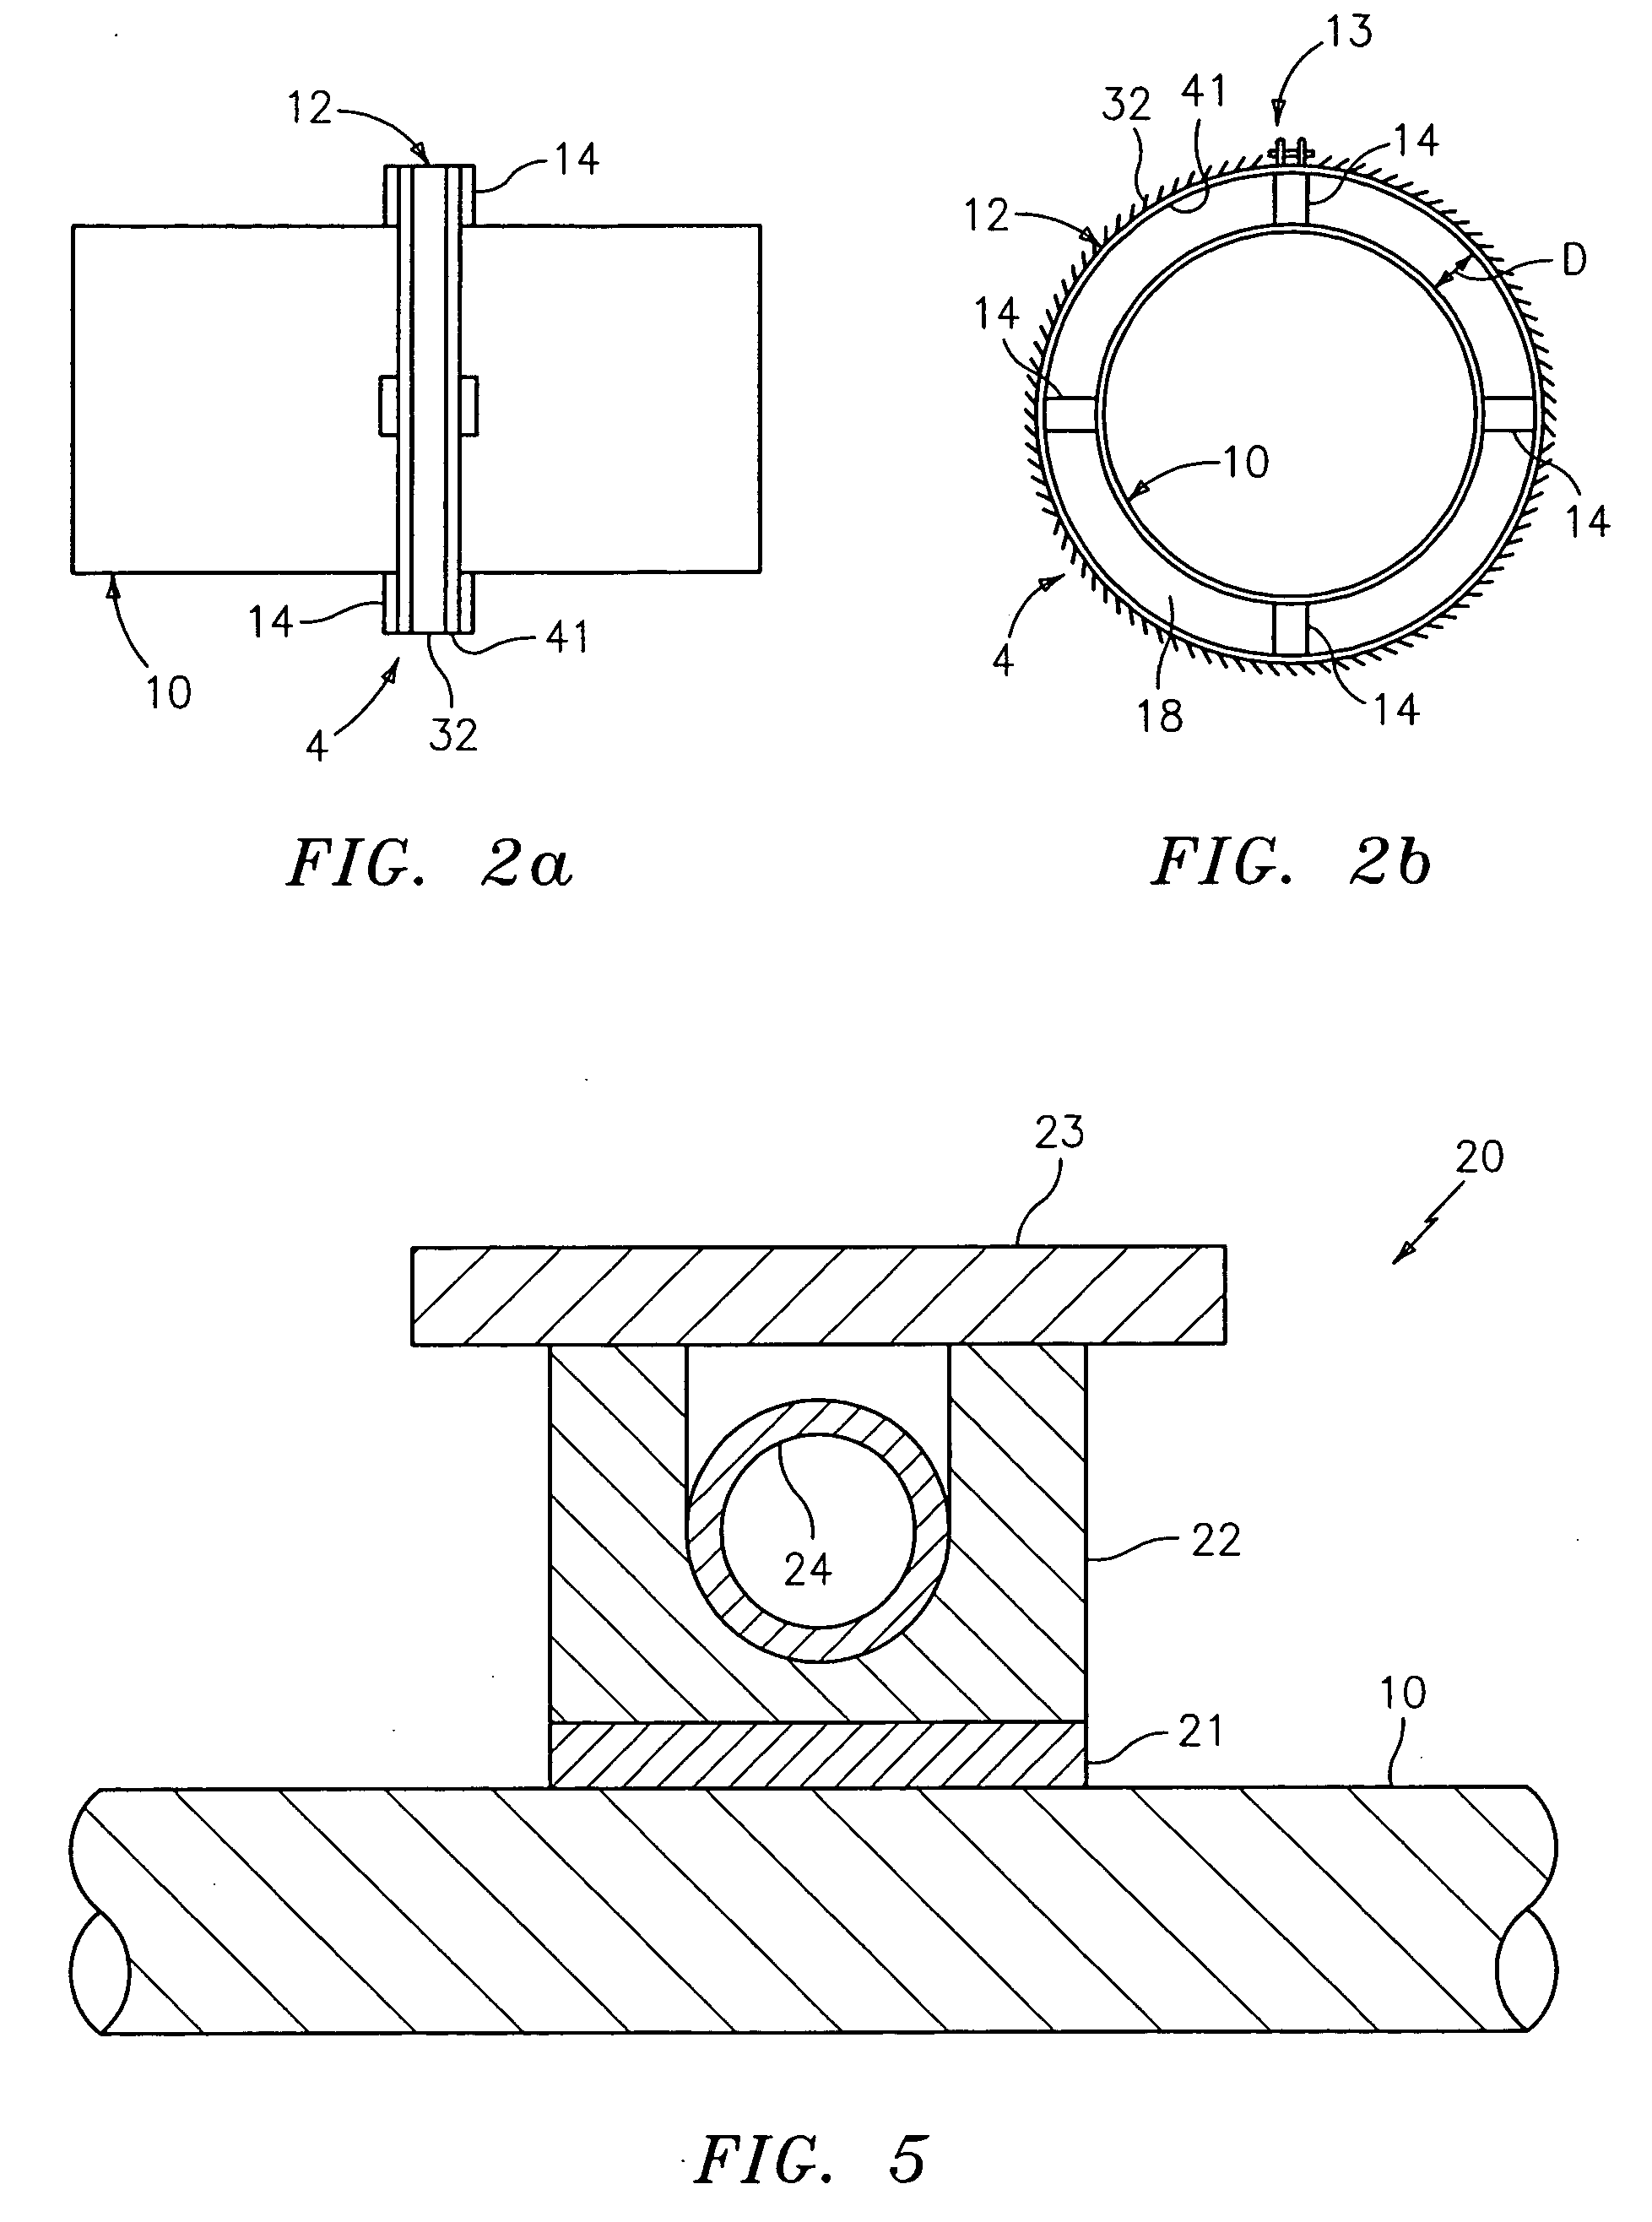 Method and apparatus for measuring a parameter of a high temperature fluid flowing within a pipe using an array of piezoelectric based flow sensors